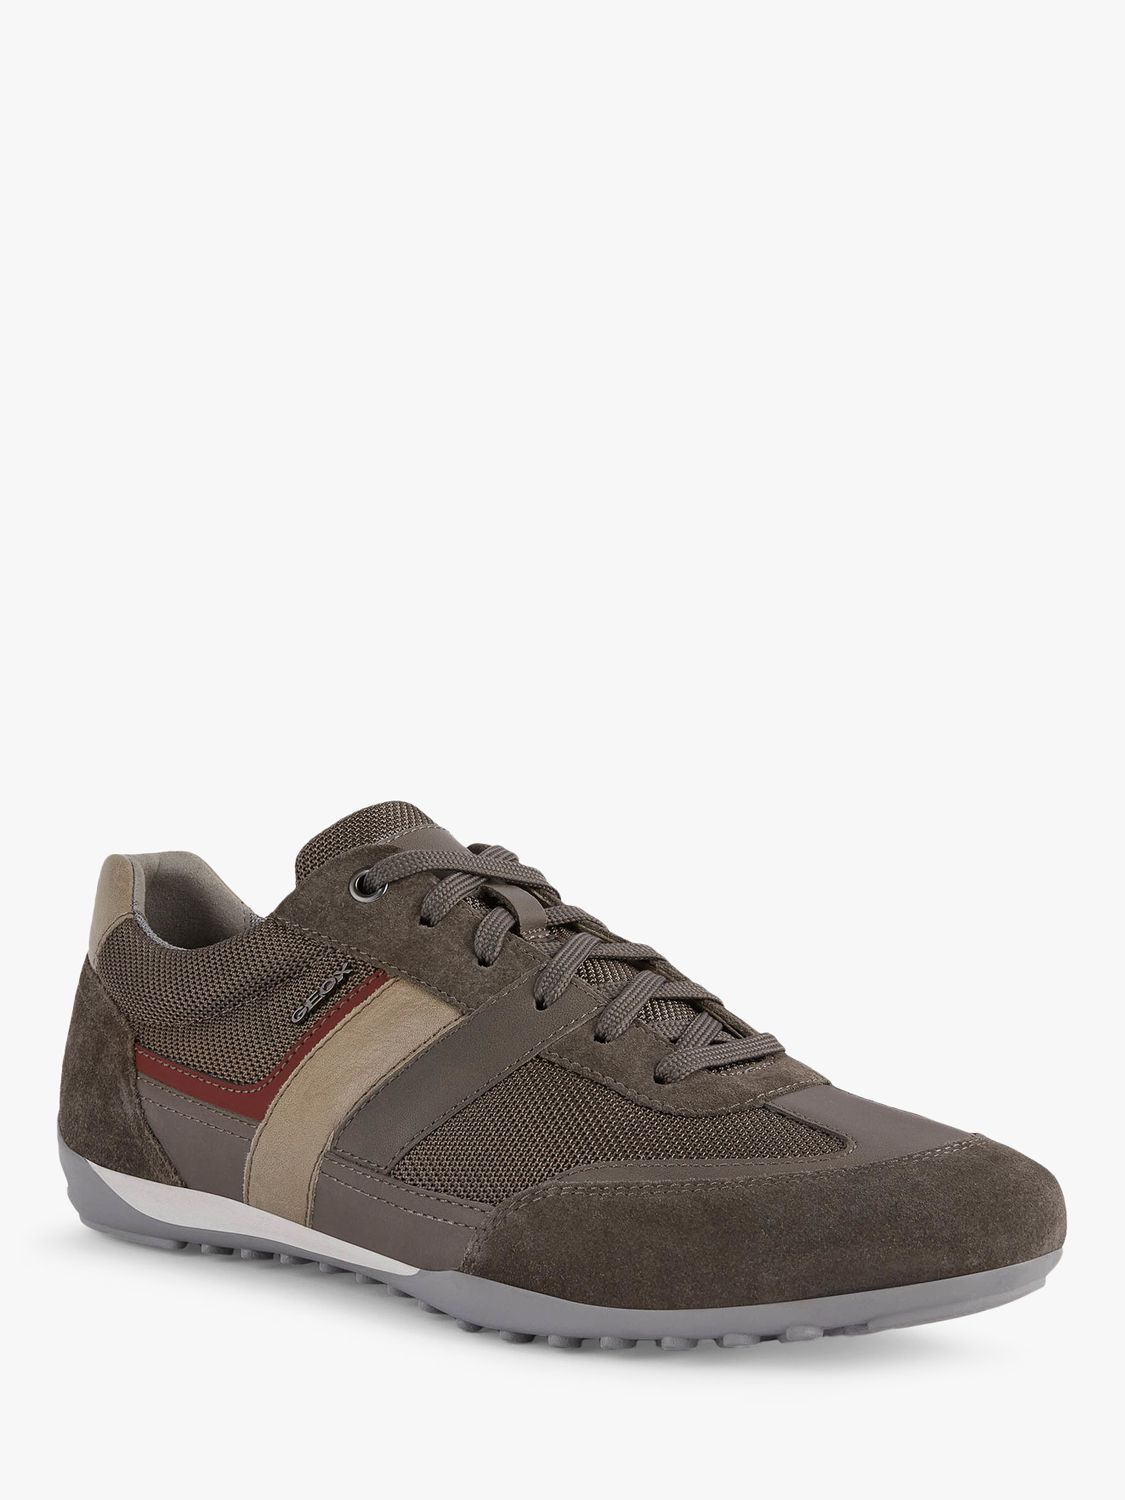 Geox Wells Leather Trainers, Dove Grey at John Lewis & Partners